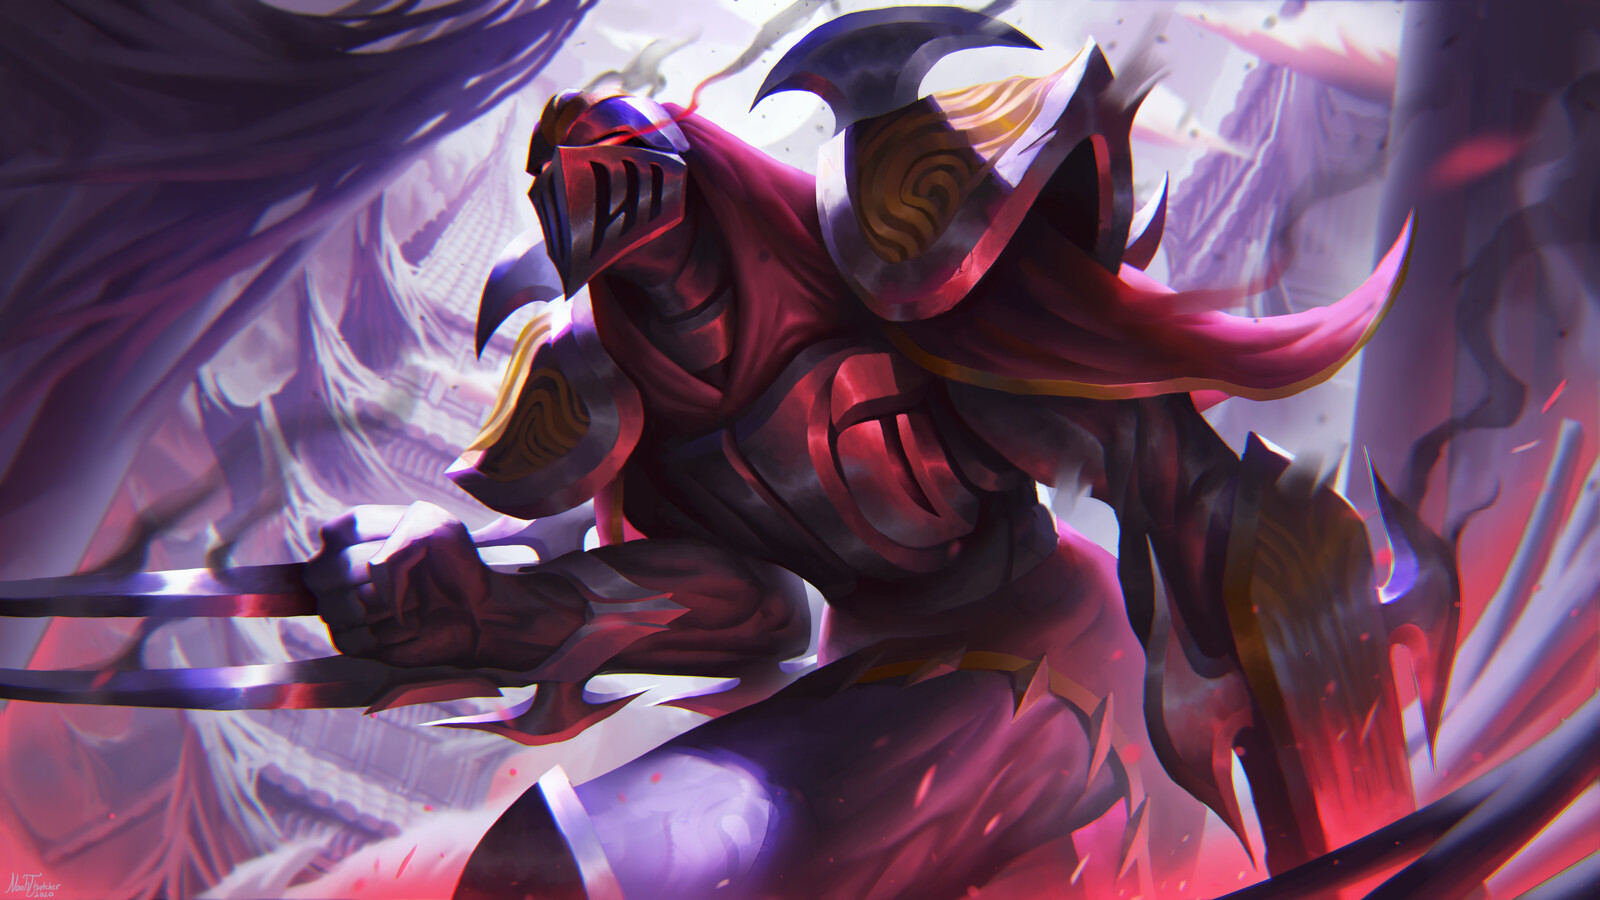 Zed, Master of Shadows